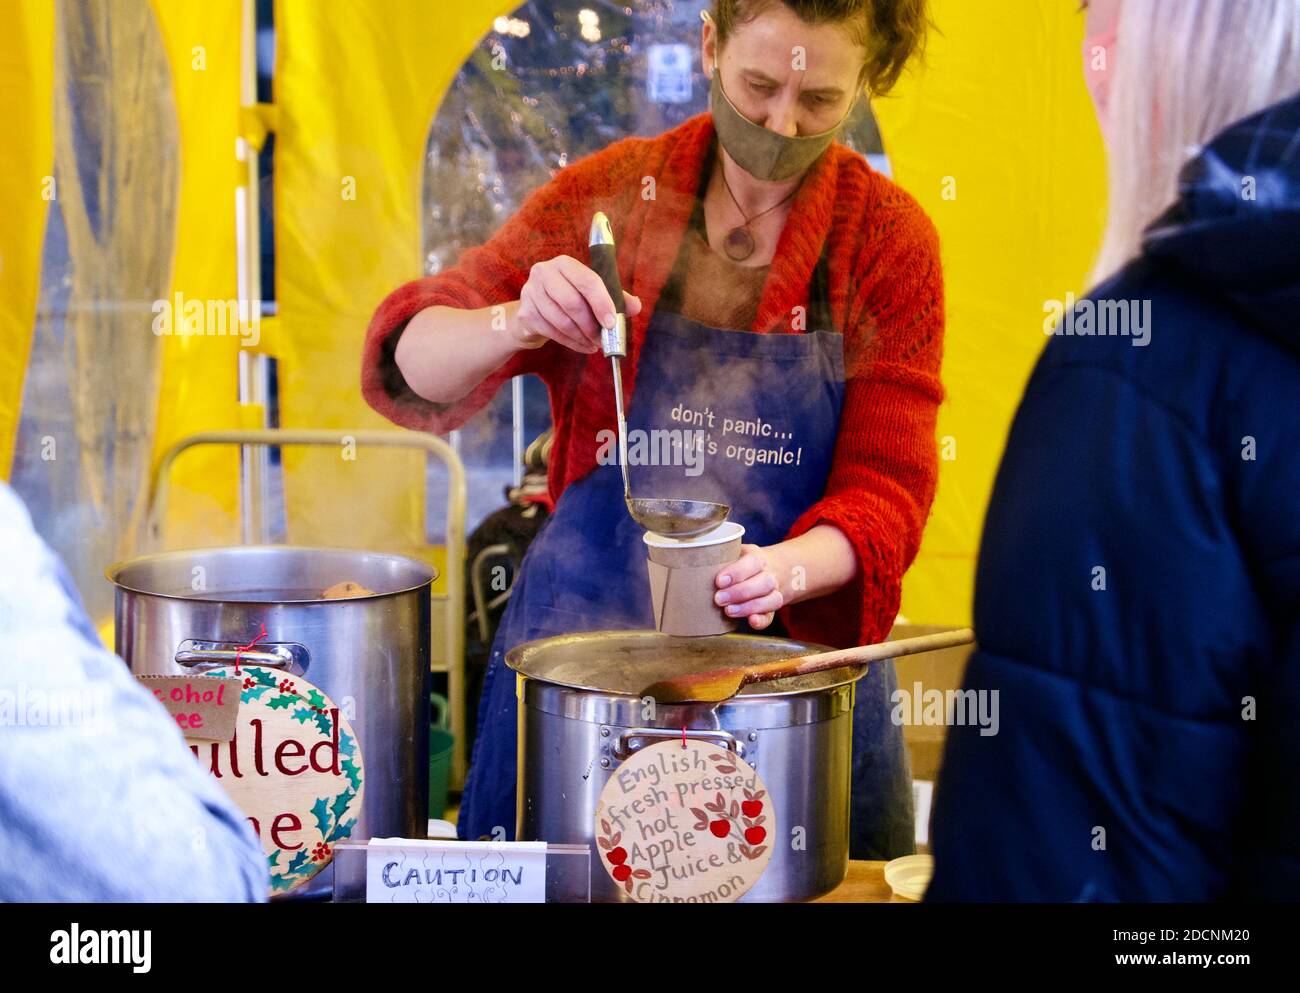 Woman wearing a face mask serves hot apple juice and cinnamon at a Christmas food market stall in Coal Drops Yard, Kings Cross, London. Stock Photo